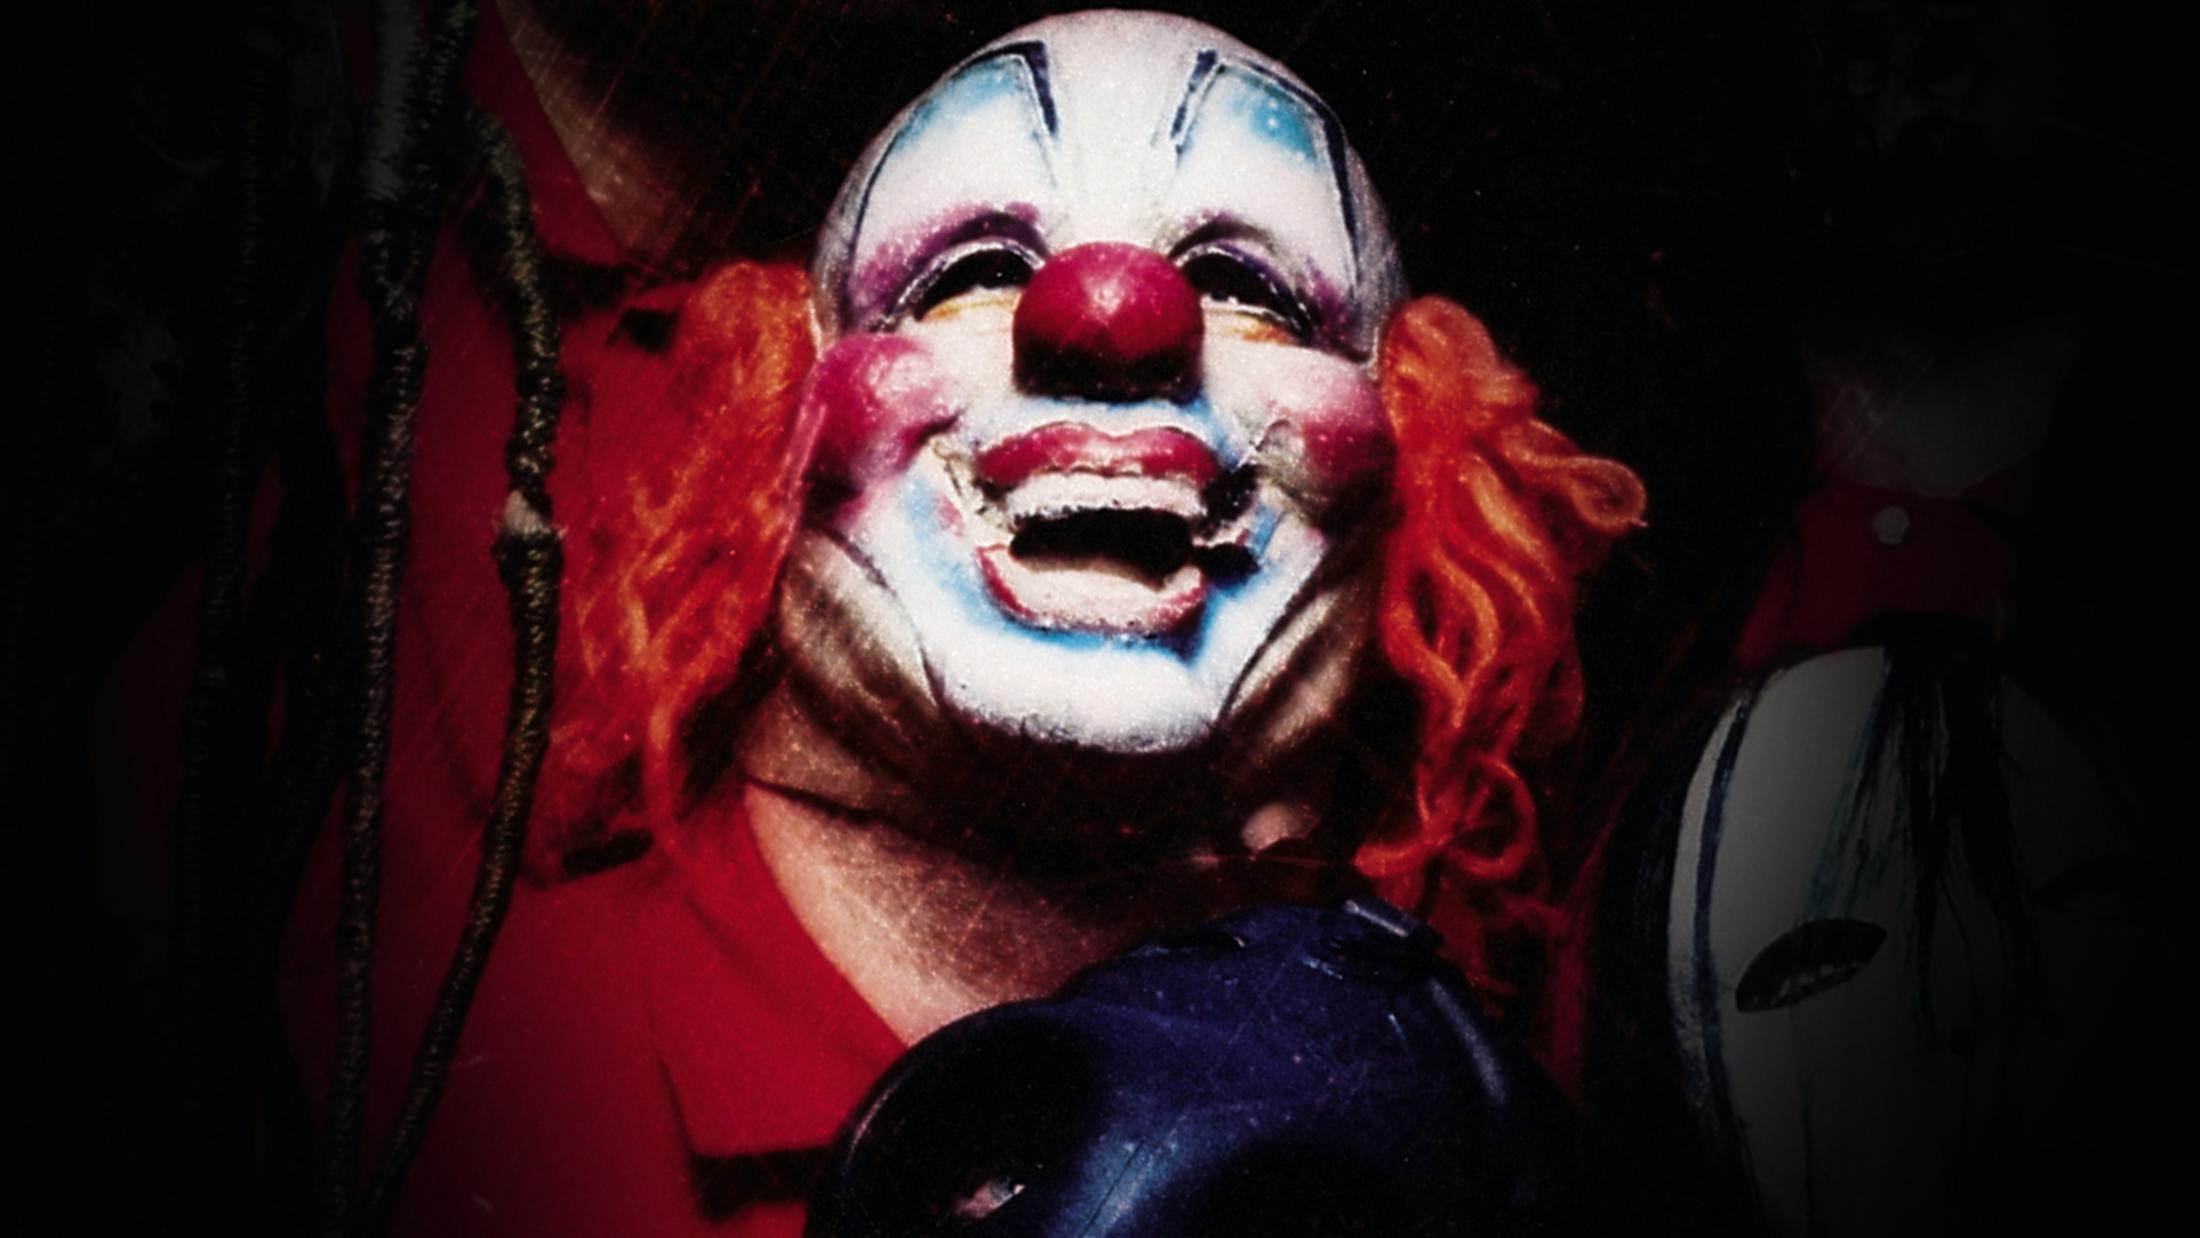 Shawn “Clown” Crahan: “I Feel like This Could Be It for Me”